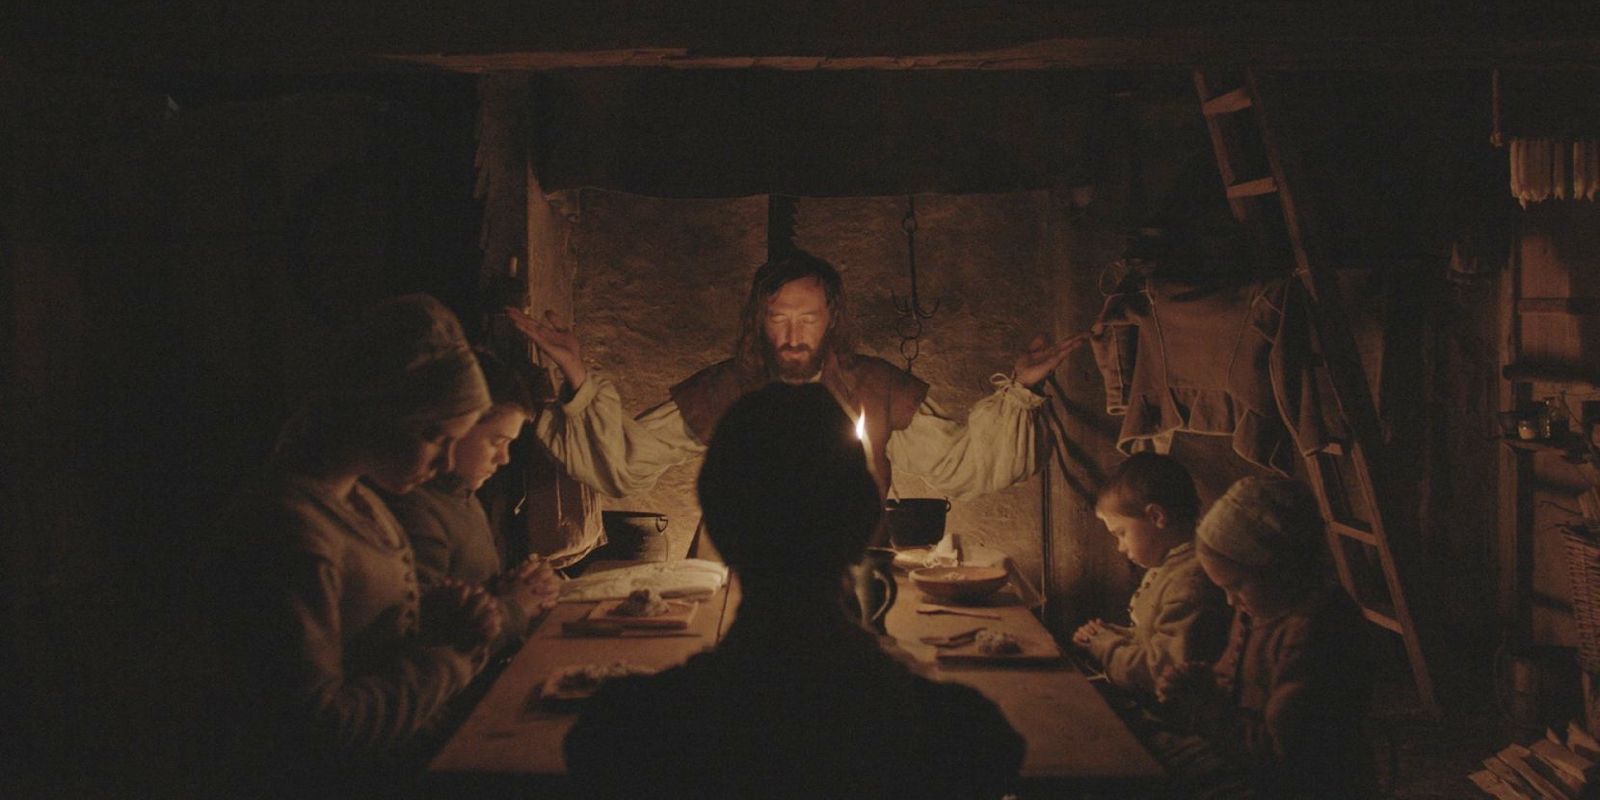 William (Ralph Ineson) prays from the head of the table in a still from the 2015 horror film The Witch